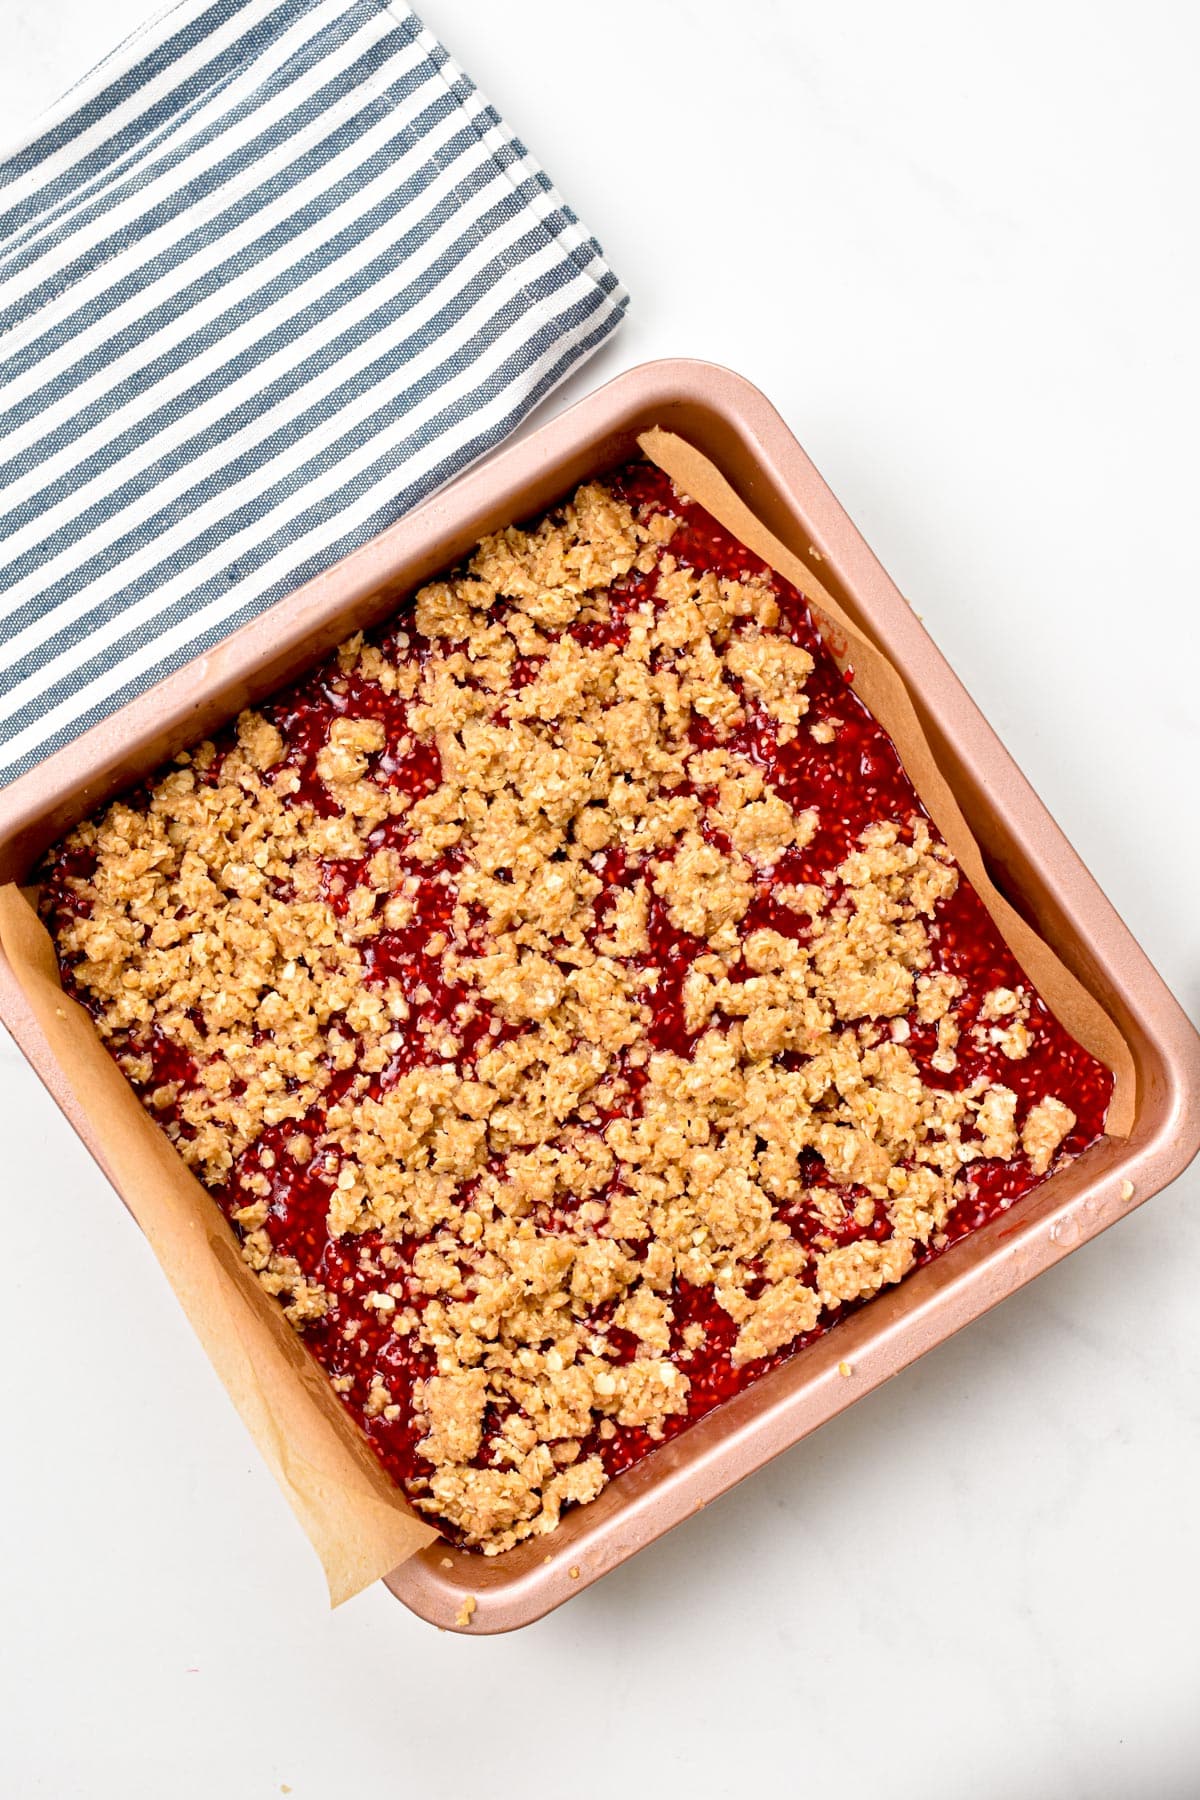 A Raspberry Oat Bars before baking in a pink 8 inches square pan lined with brown parchment paper.